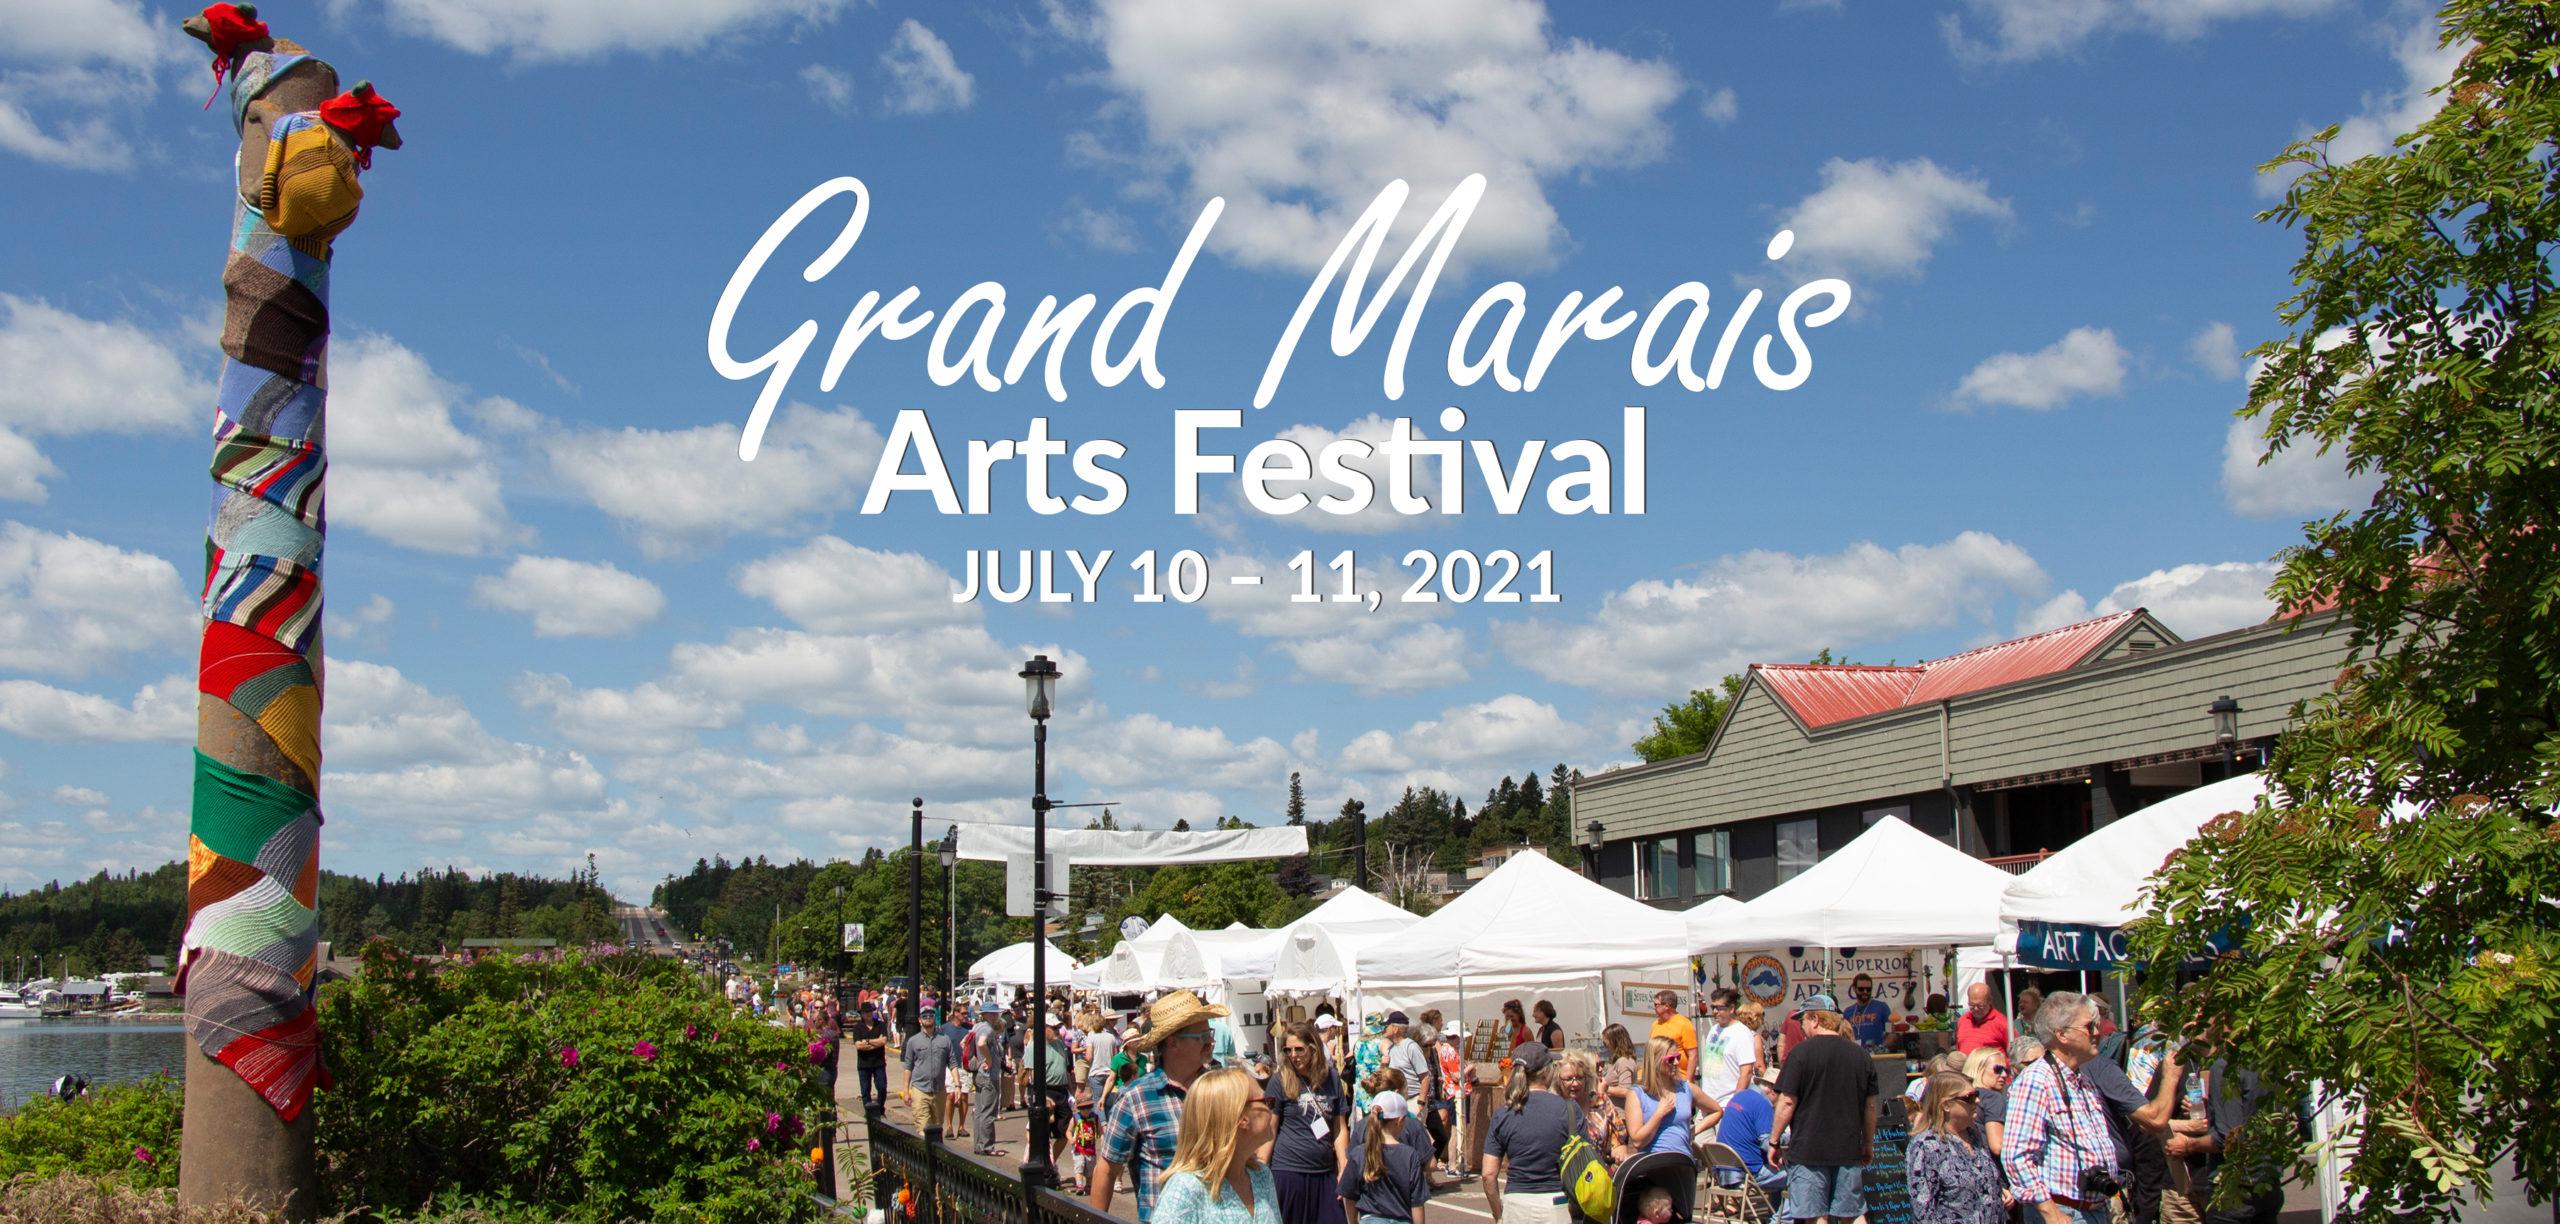 Updated information on the Grand Marais Arts Festival Boreal